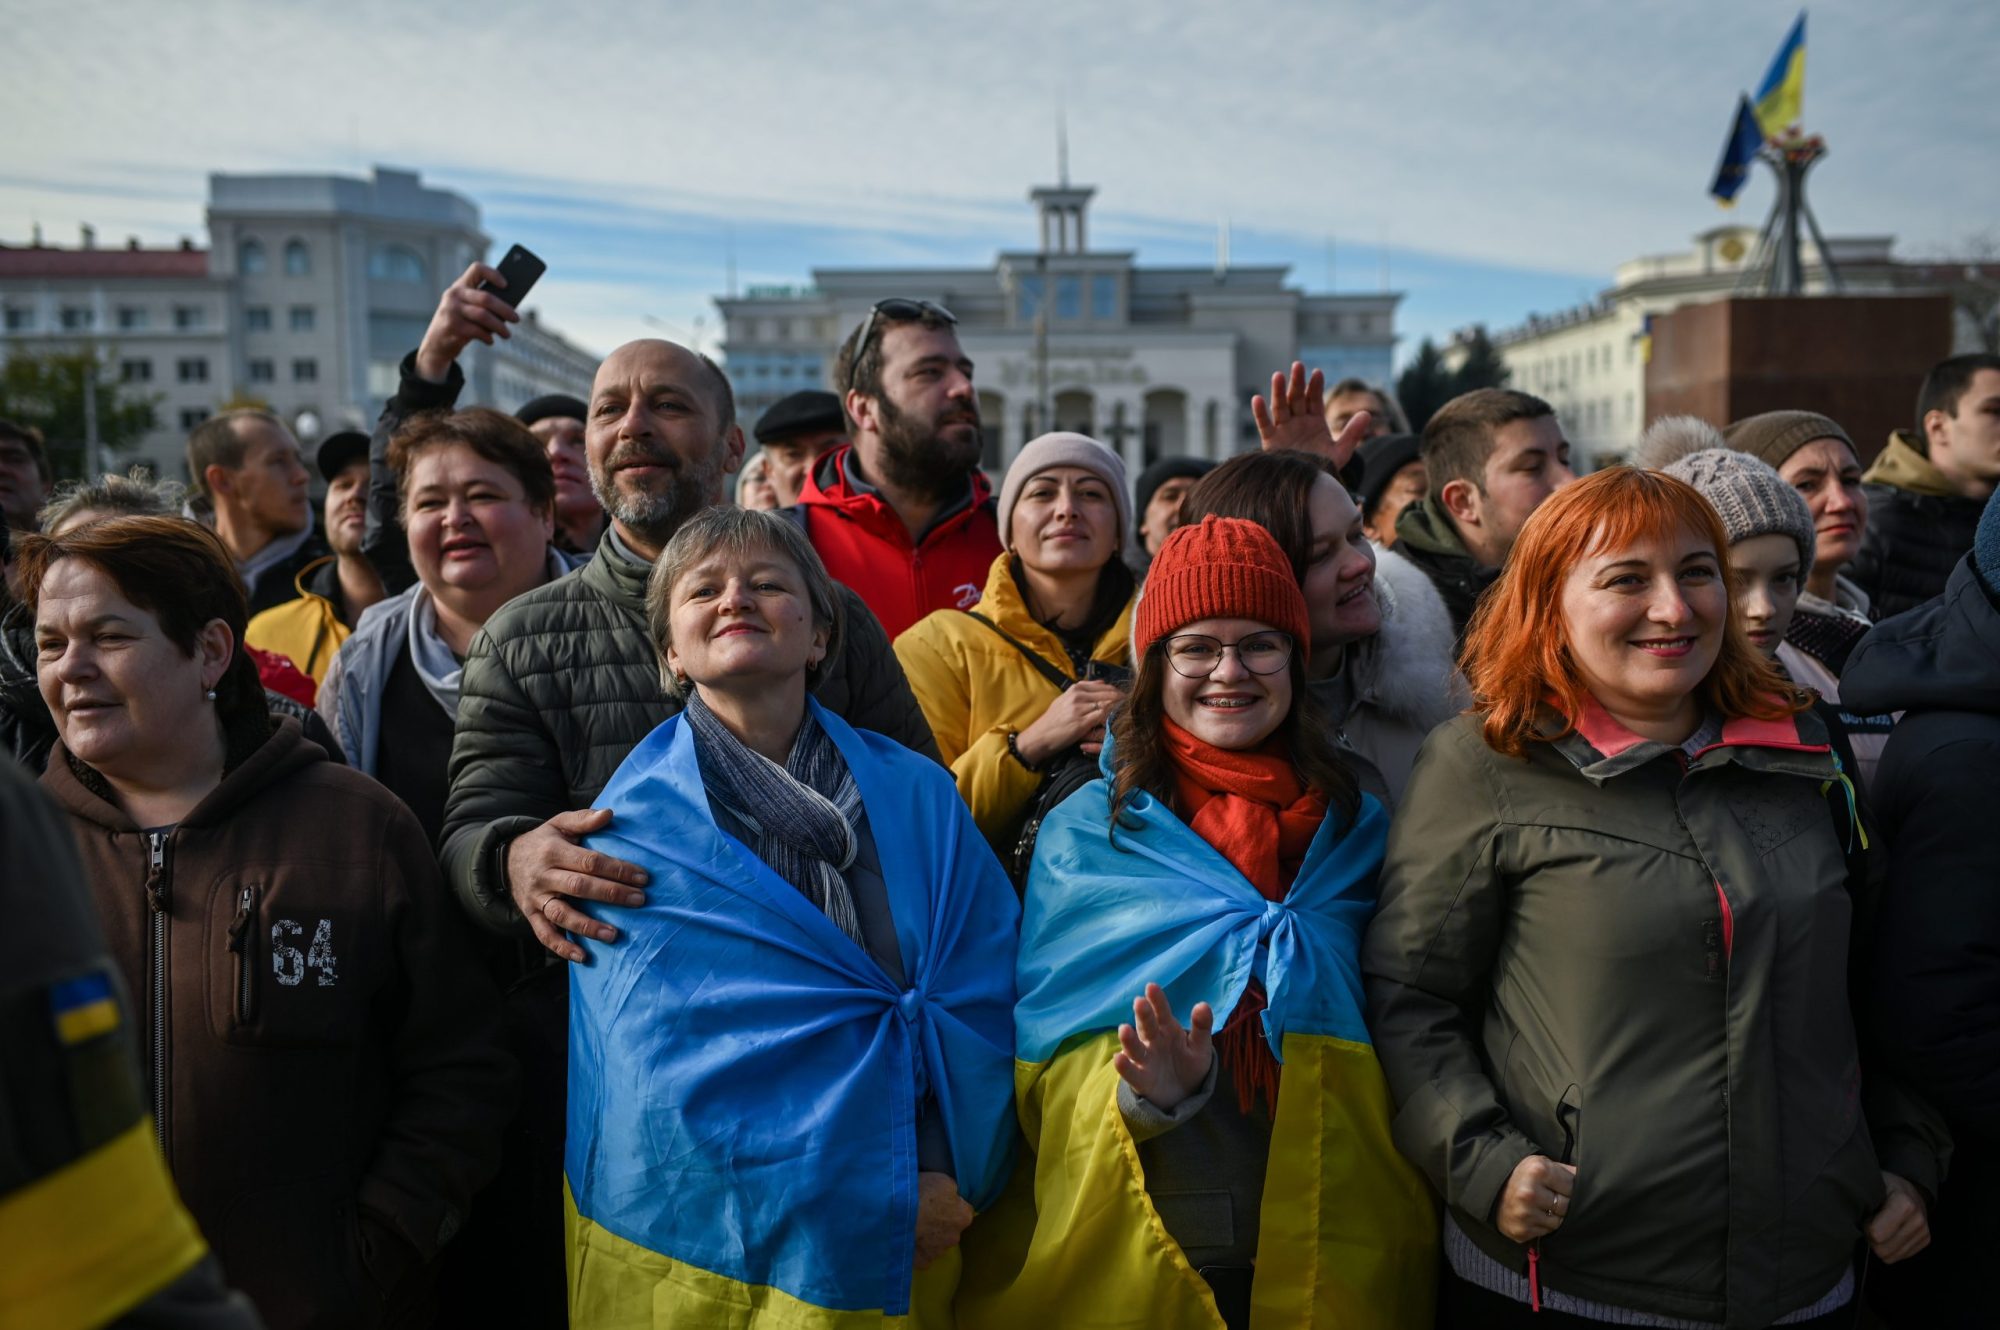 The Rise and Role of Ukrainian Ethnic Nationalism